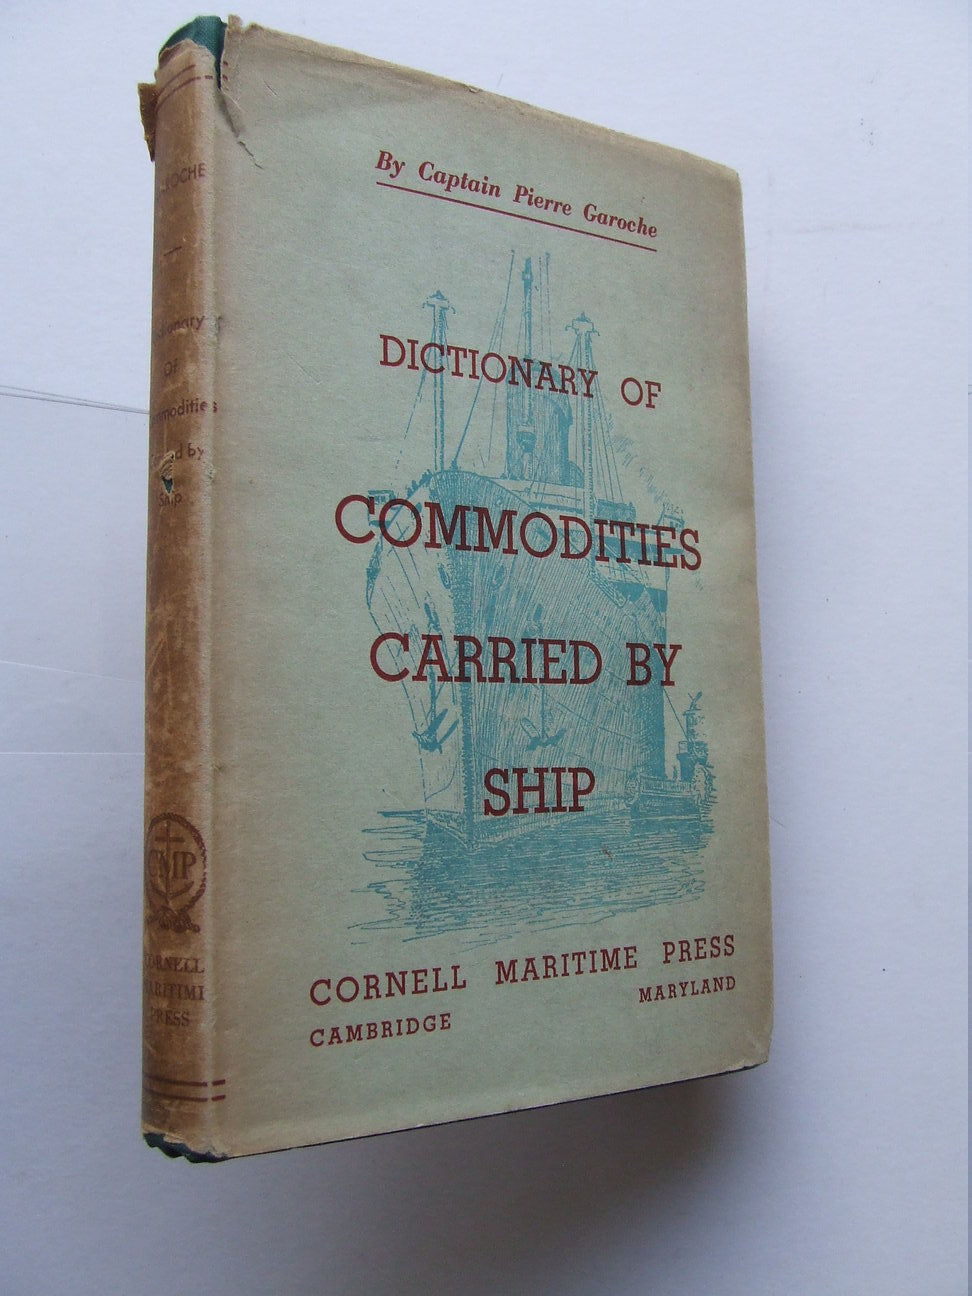 Dictionary of Commodities Carried by Sea